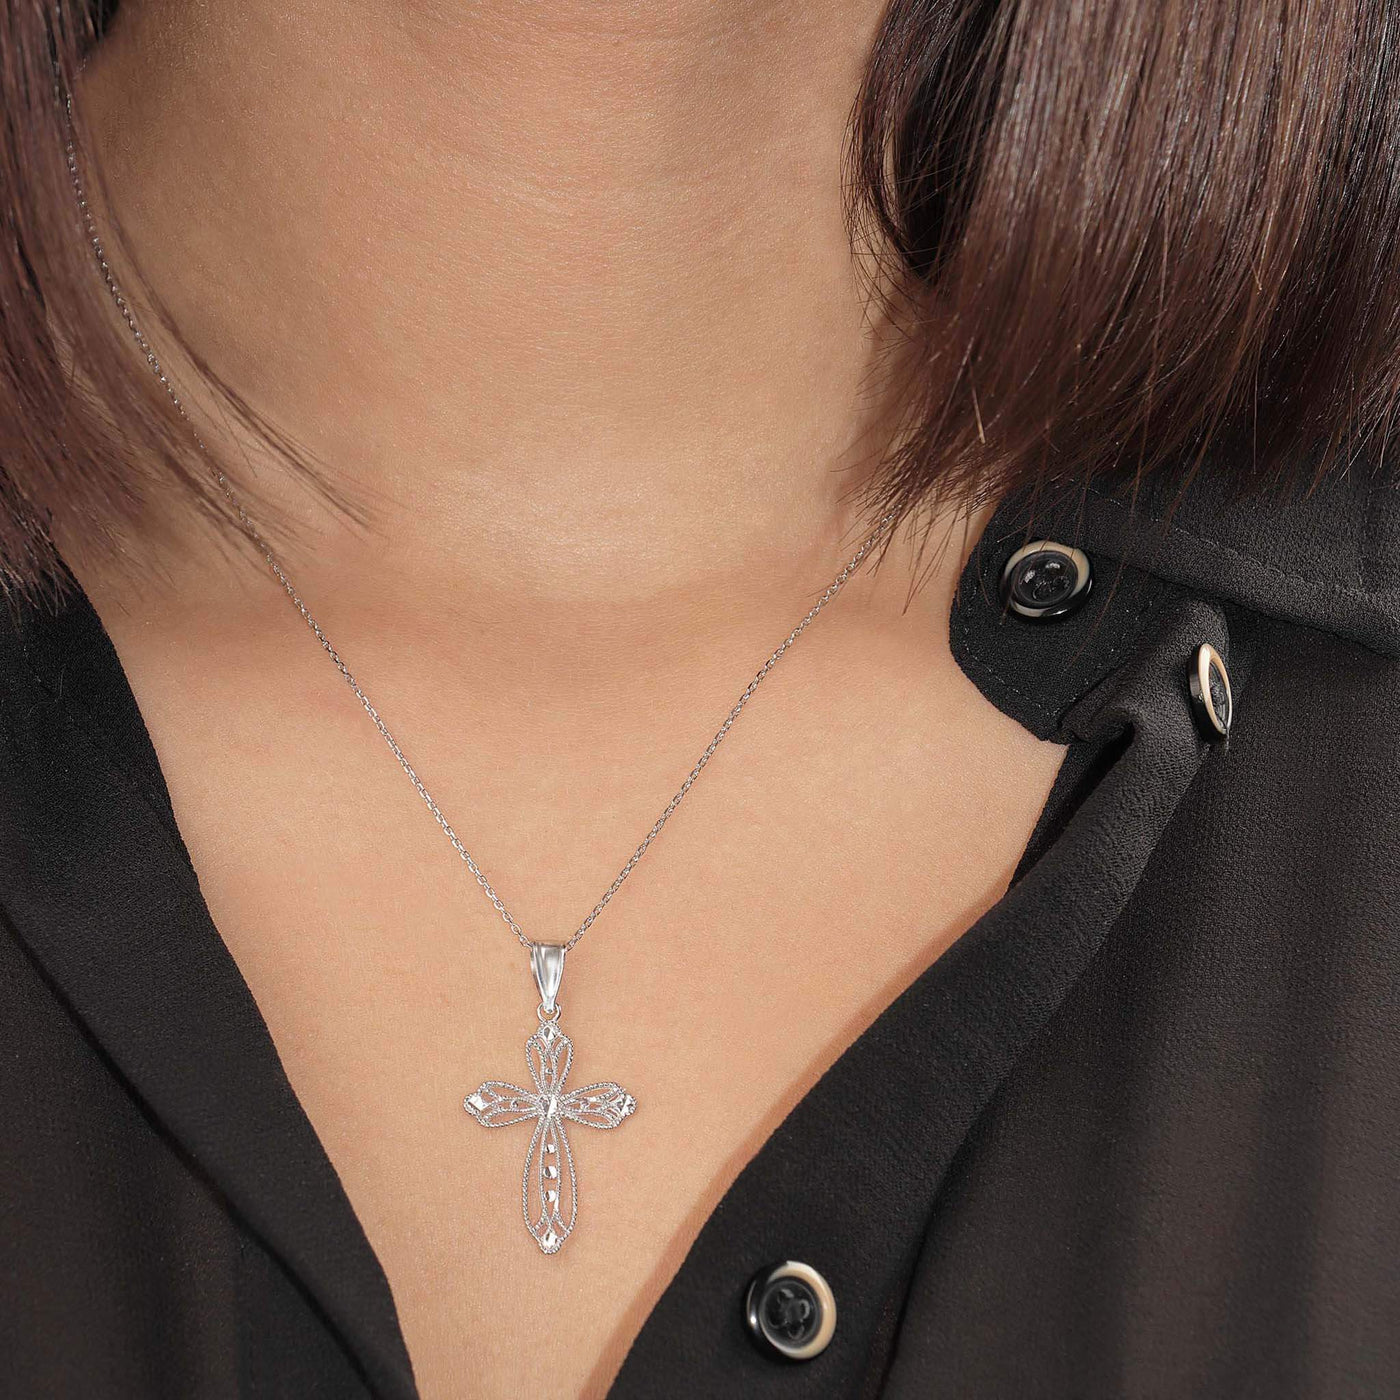 Softly Curved Cross Necklace Pendant - Gloria Jewels